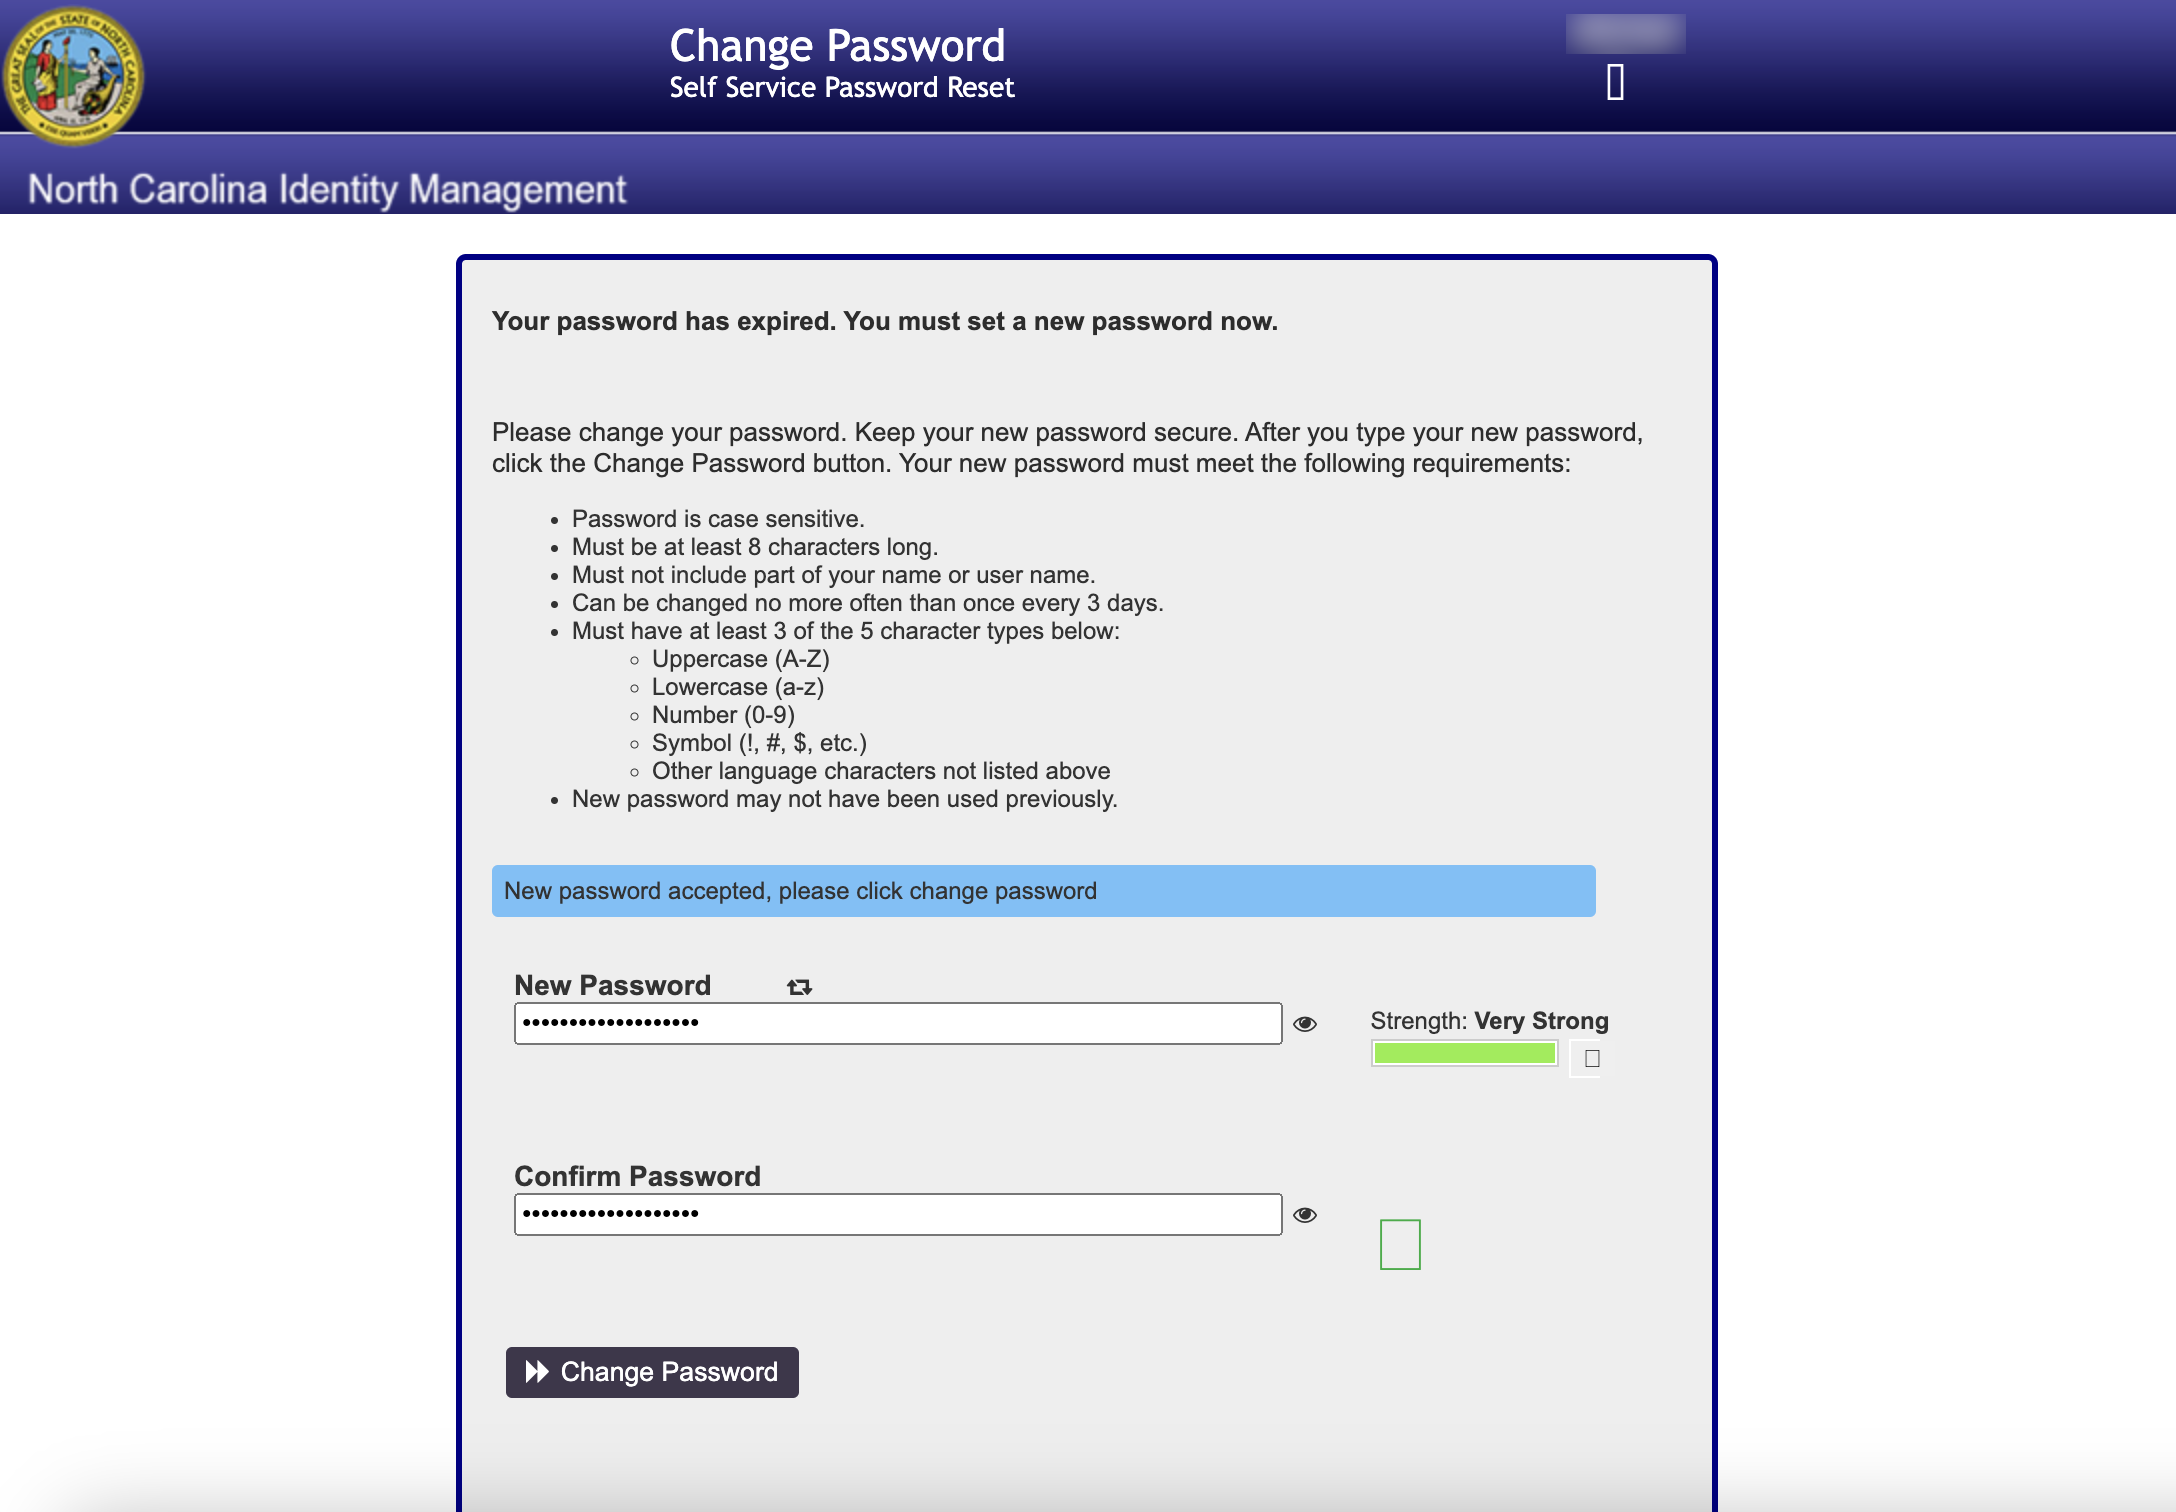 NCID change password screen with new and confirm password fields and a change password button